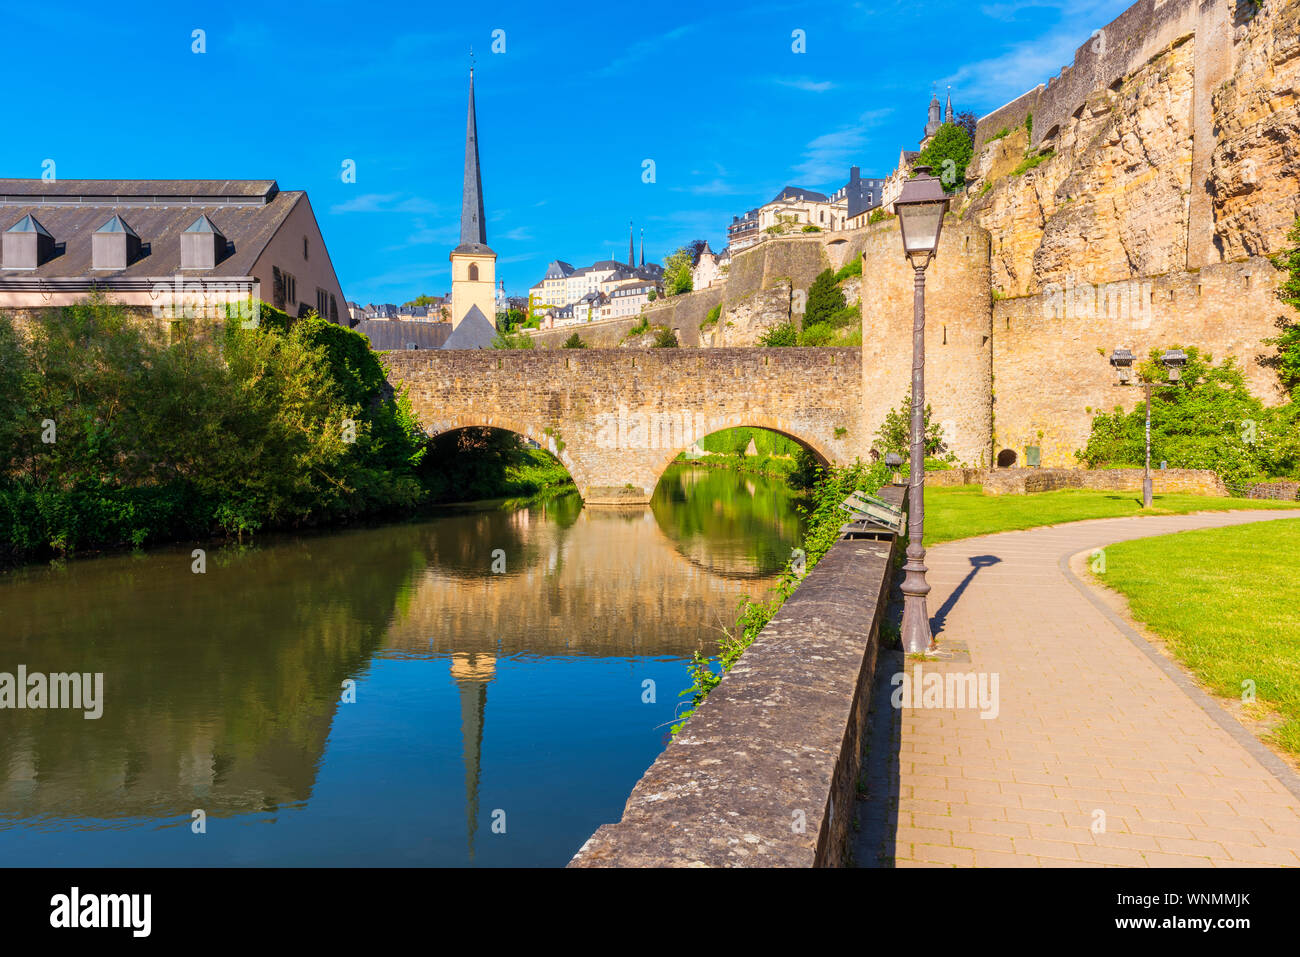 Bridge crossing Alzette River in downtown district of Luxembourg City, capital of Luxembourg Stock Photo